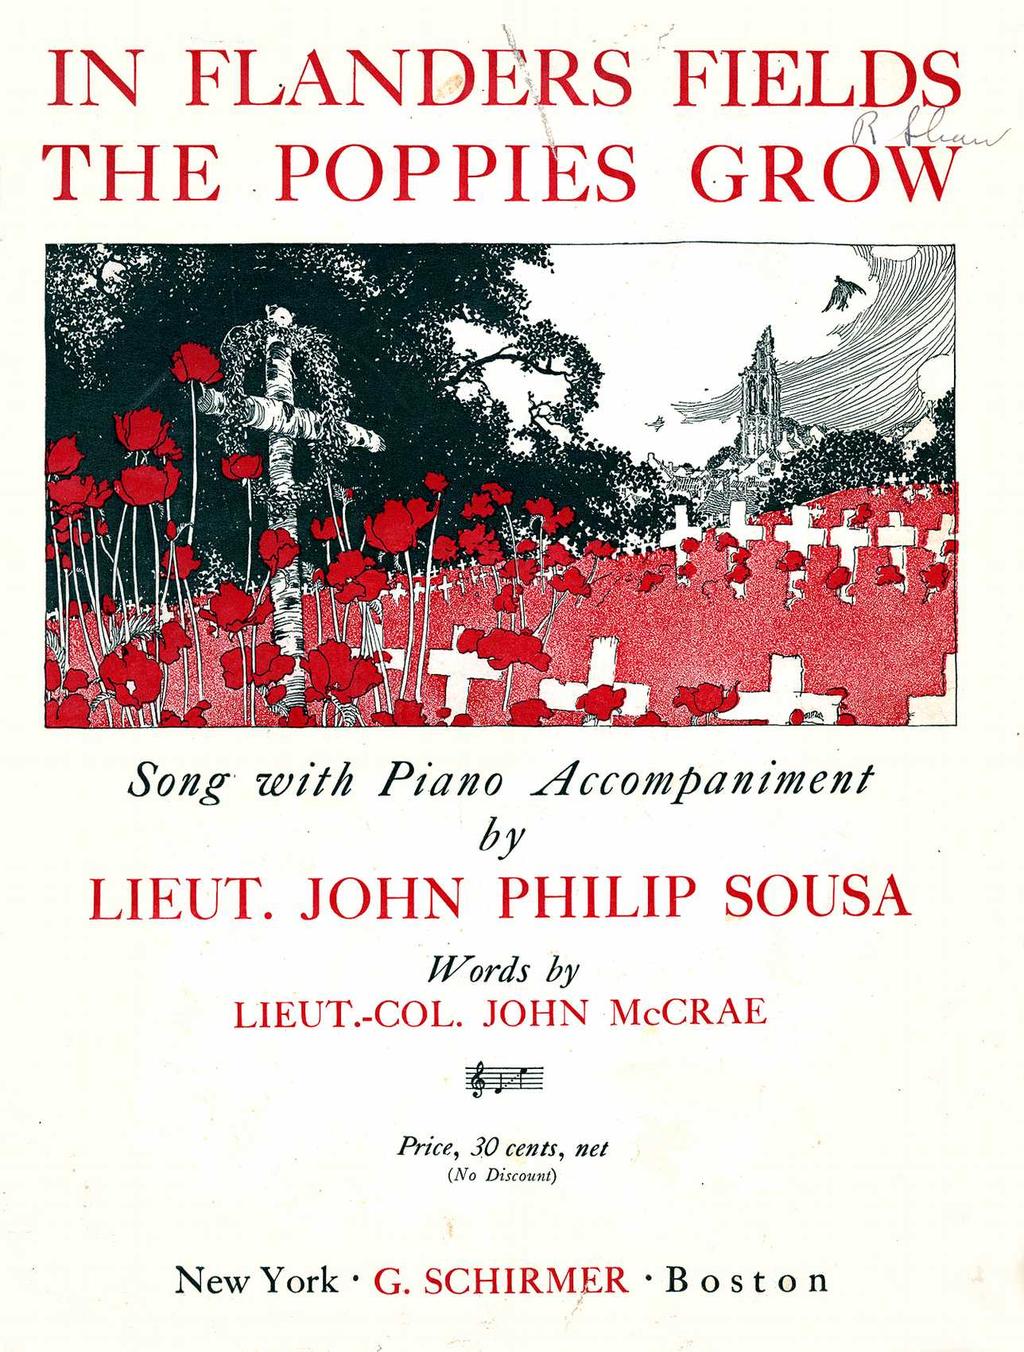 In Flanders Fields100 In Flanders fields the poppies grow Between the crosses, row on row That mark our place: and in the sky The larks still bravely singing, fly Scarce heard amid the guns below.